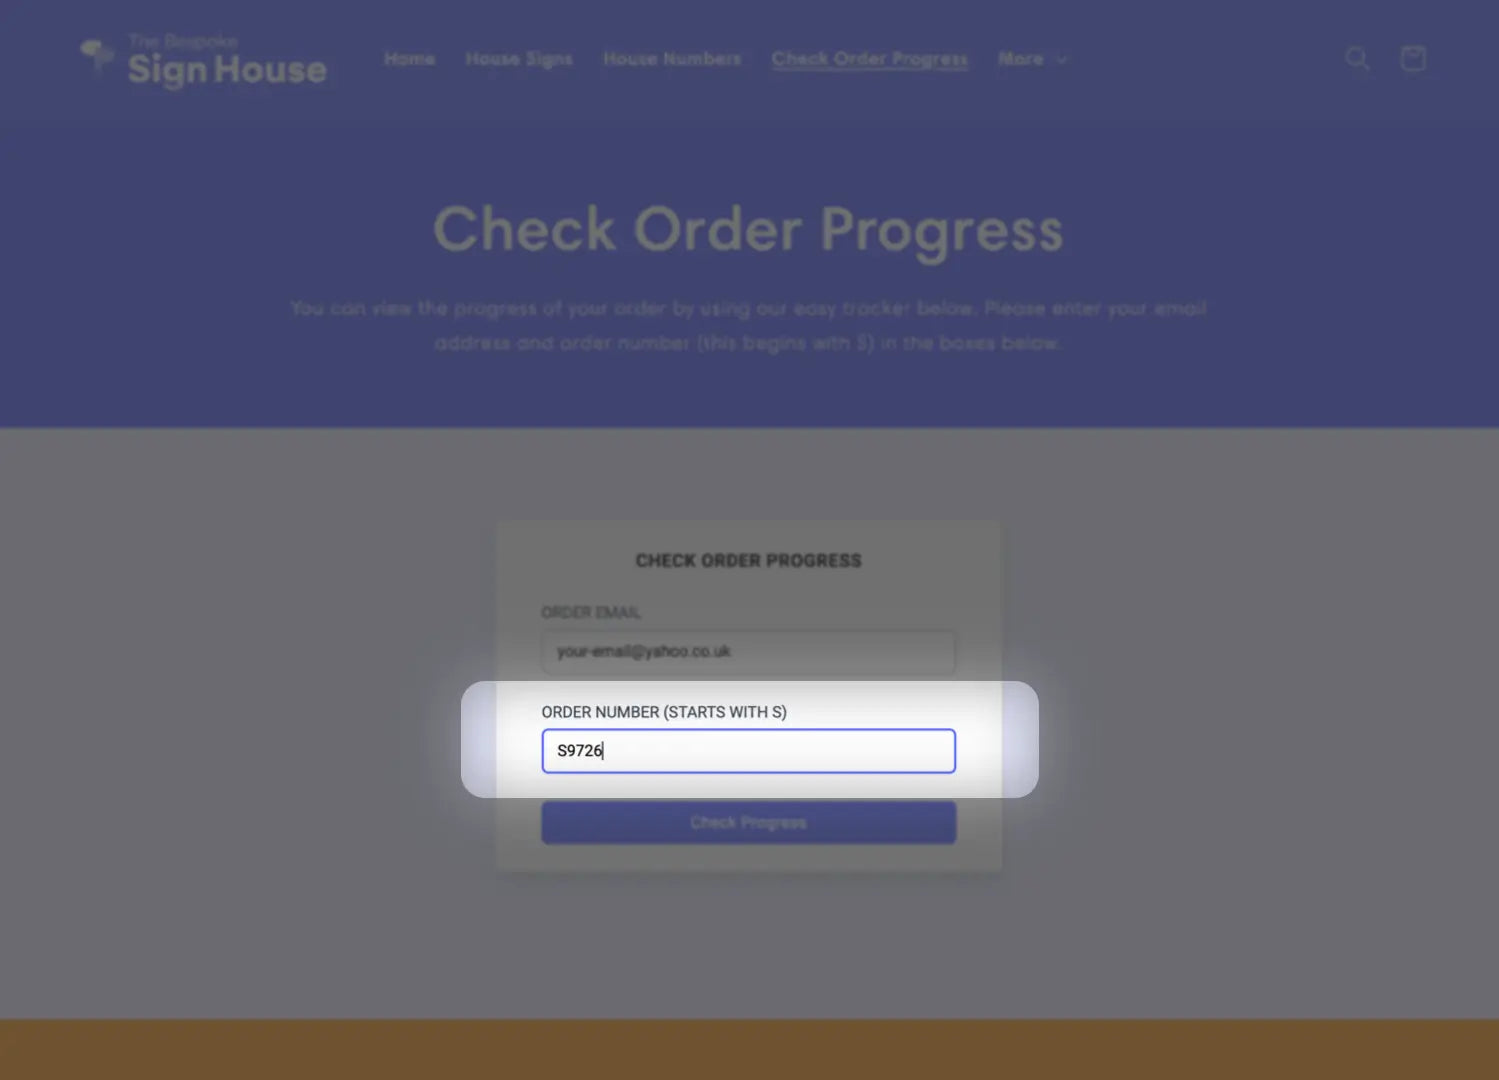 copy and paste your order number into our order tracker